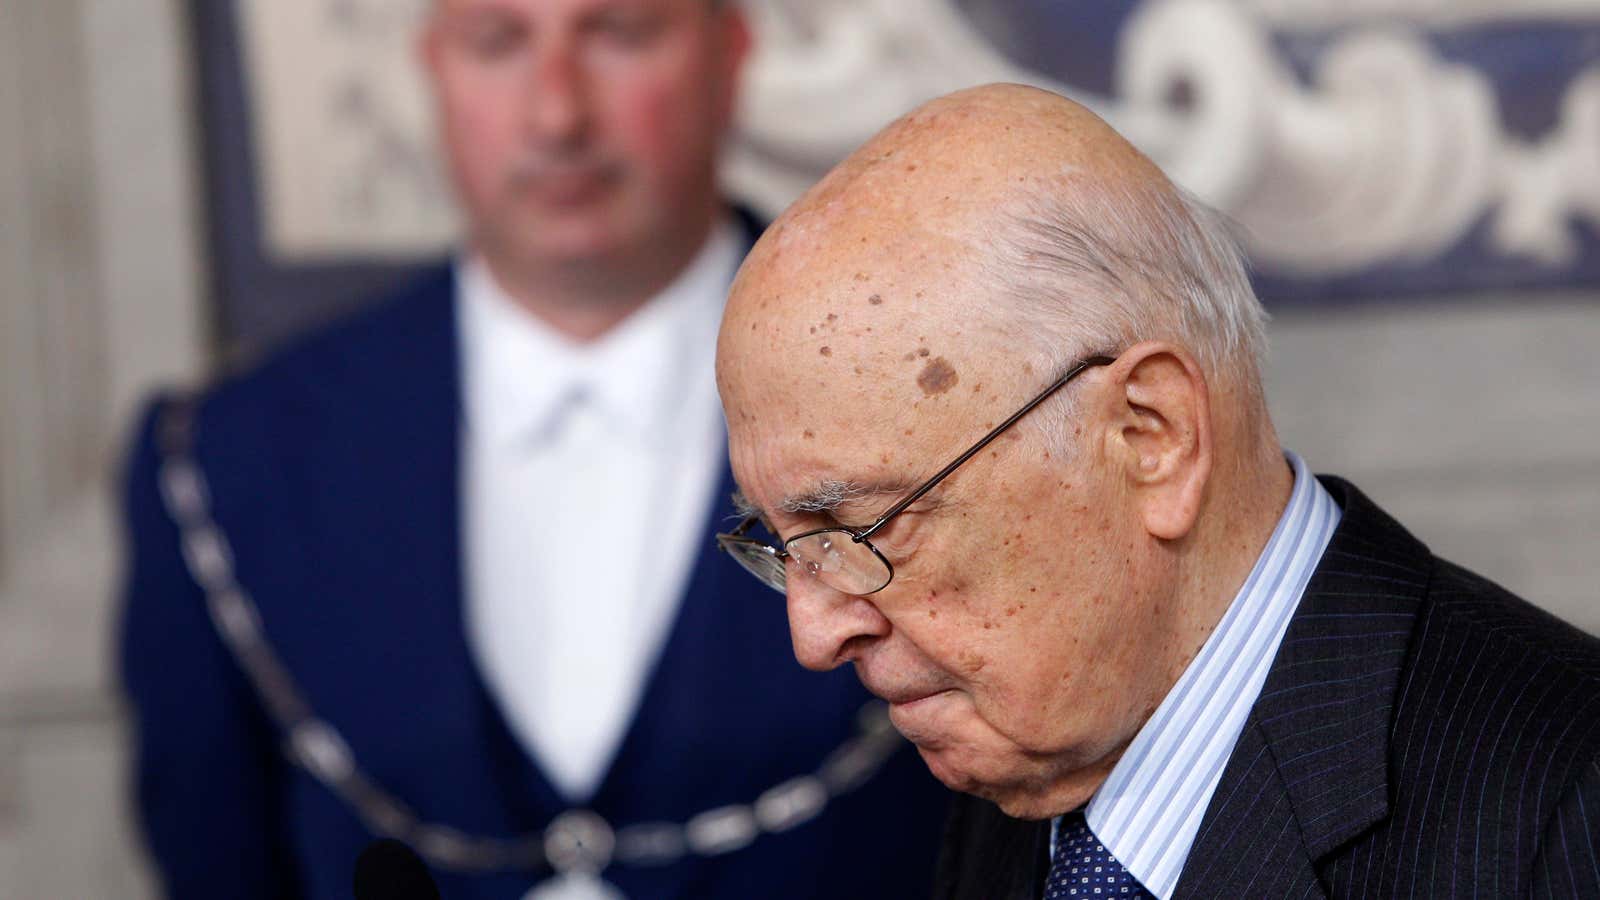 Giorgio Napolitano contemplates another seven years of this.